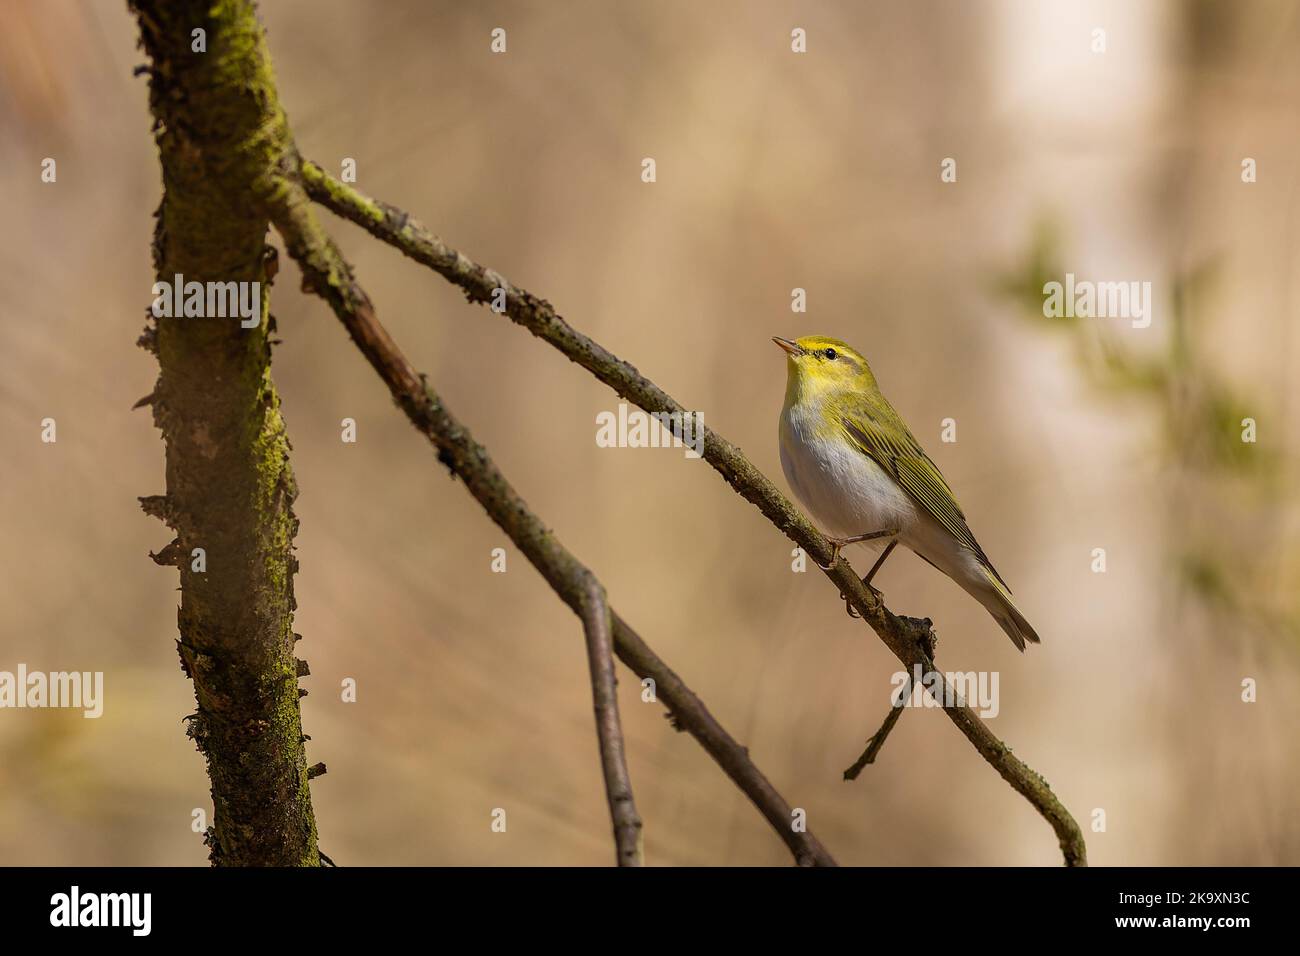 A wild songbird, a yellow, green and white bird, the wood warbler, perching on a little branch. Sunny spring day in the forest. Blurry brown backgroun Stock Photo